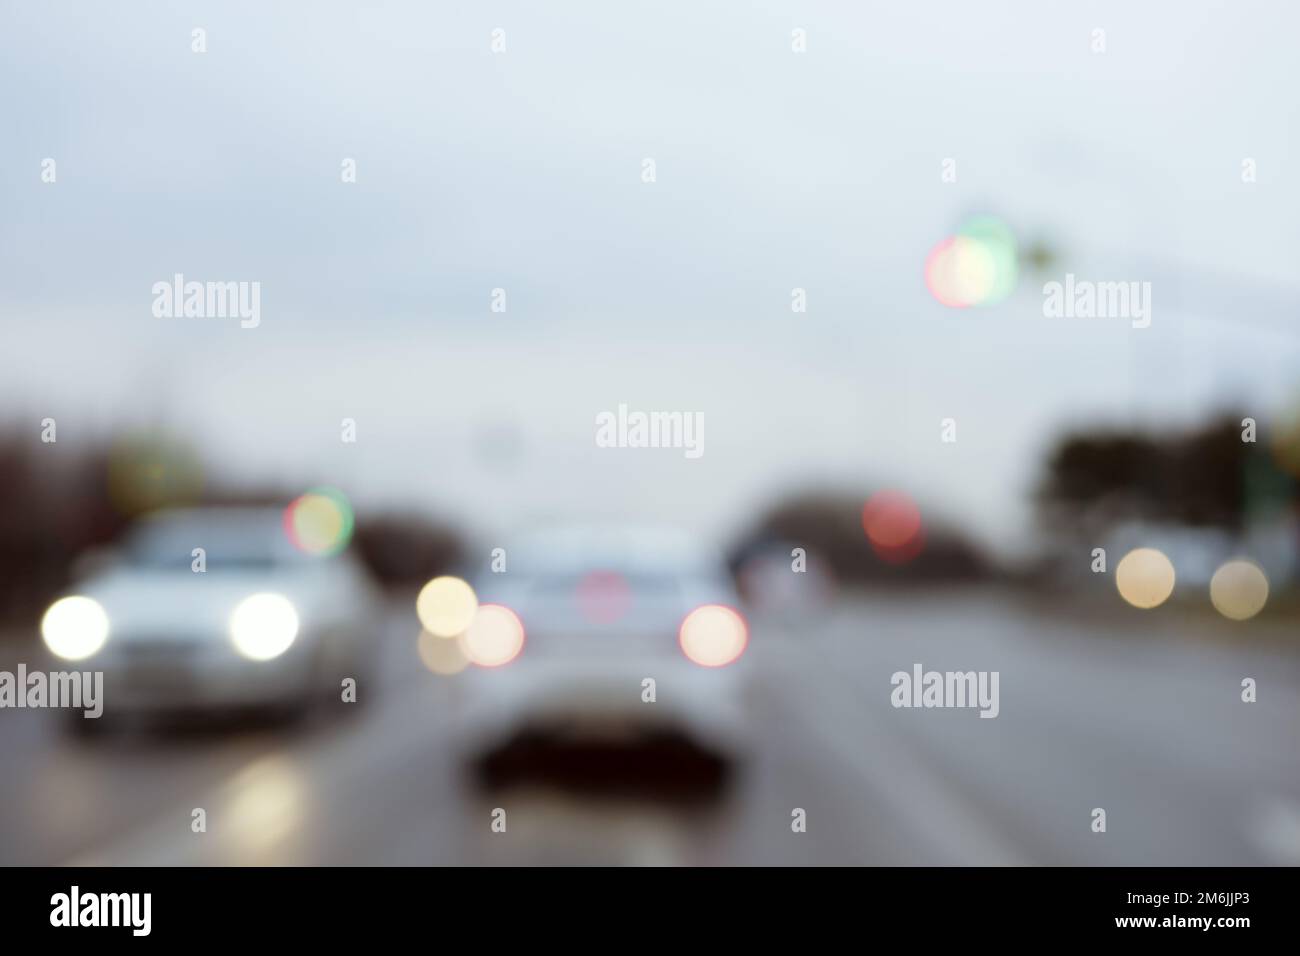 Cars with headlights on are driving down the road on a cloudy day. Blurred photo Stock Photo